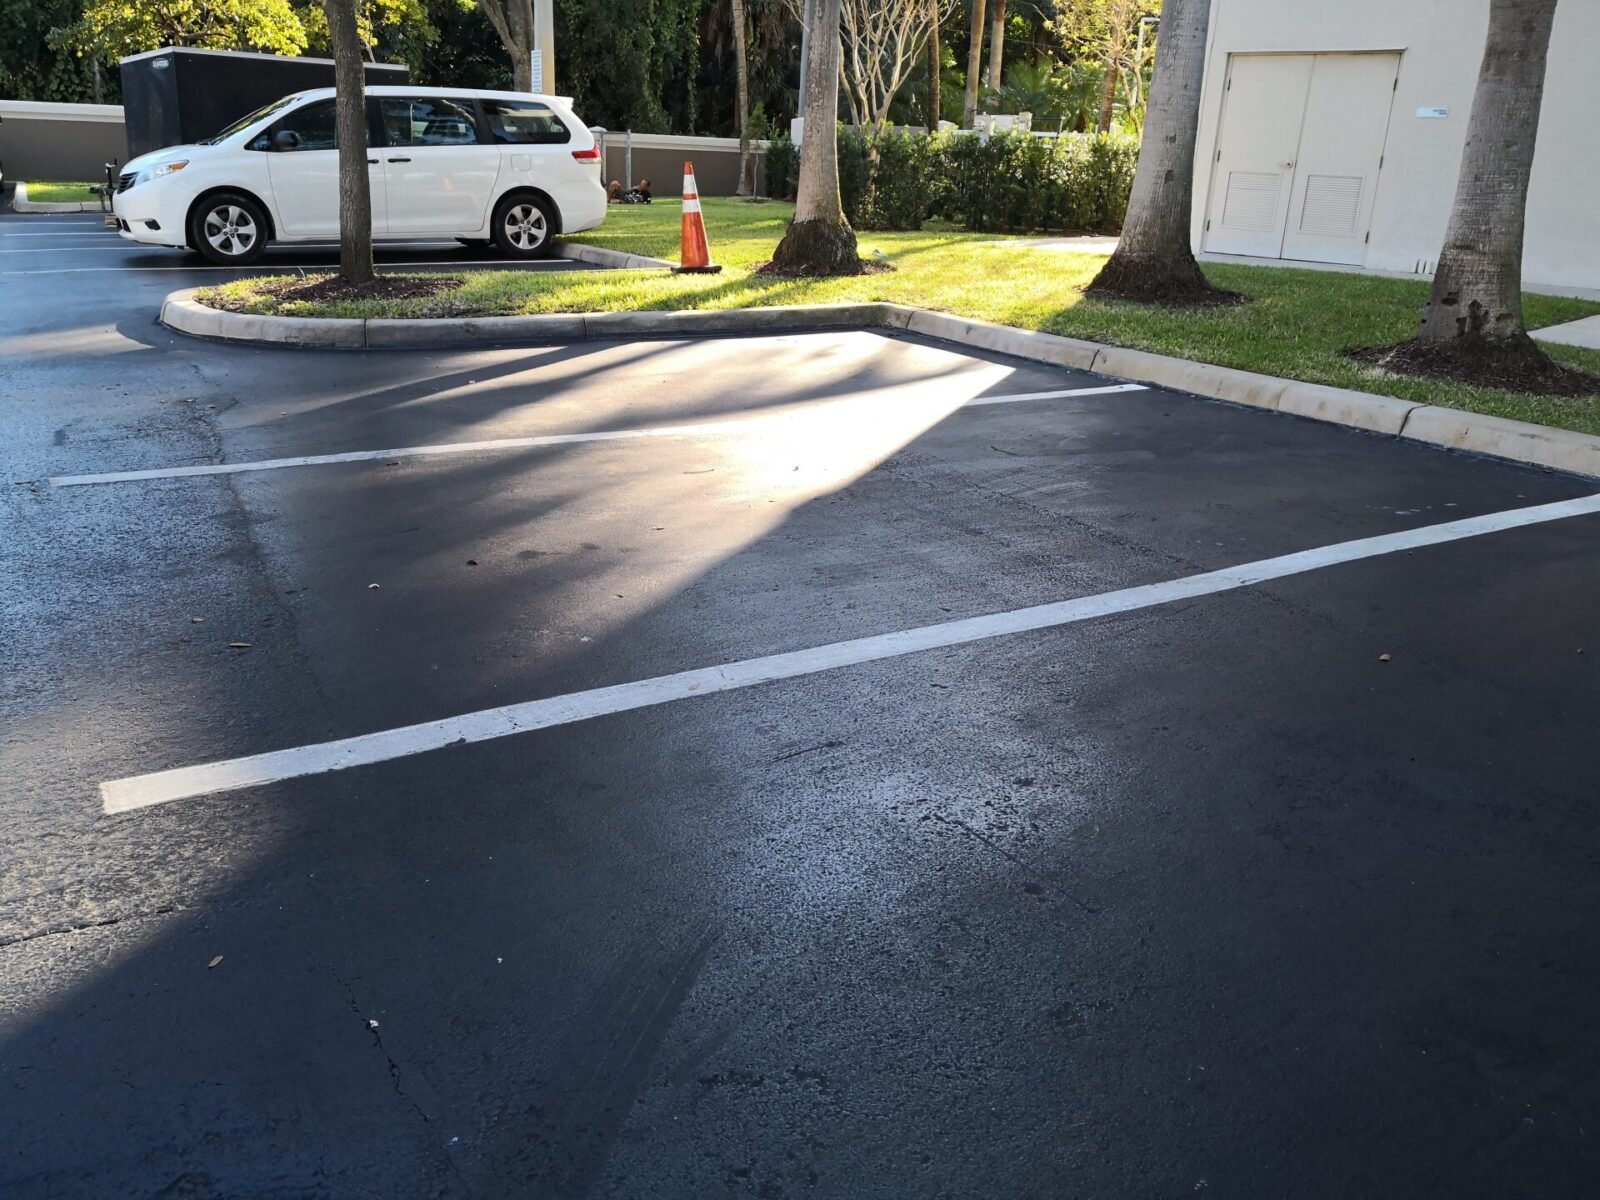 A small parking lot with a few empty spaces, ideal for fresh asphalt paving by Palm Beach Asphalt. A white minivan is parked next to the curb with an orange traffic cone placed in front of it. Trees and a small building entrance are visible in the background. Get your free quote today!